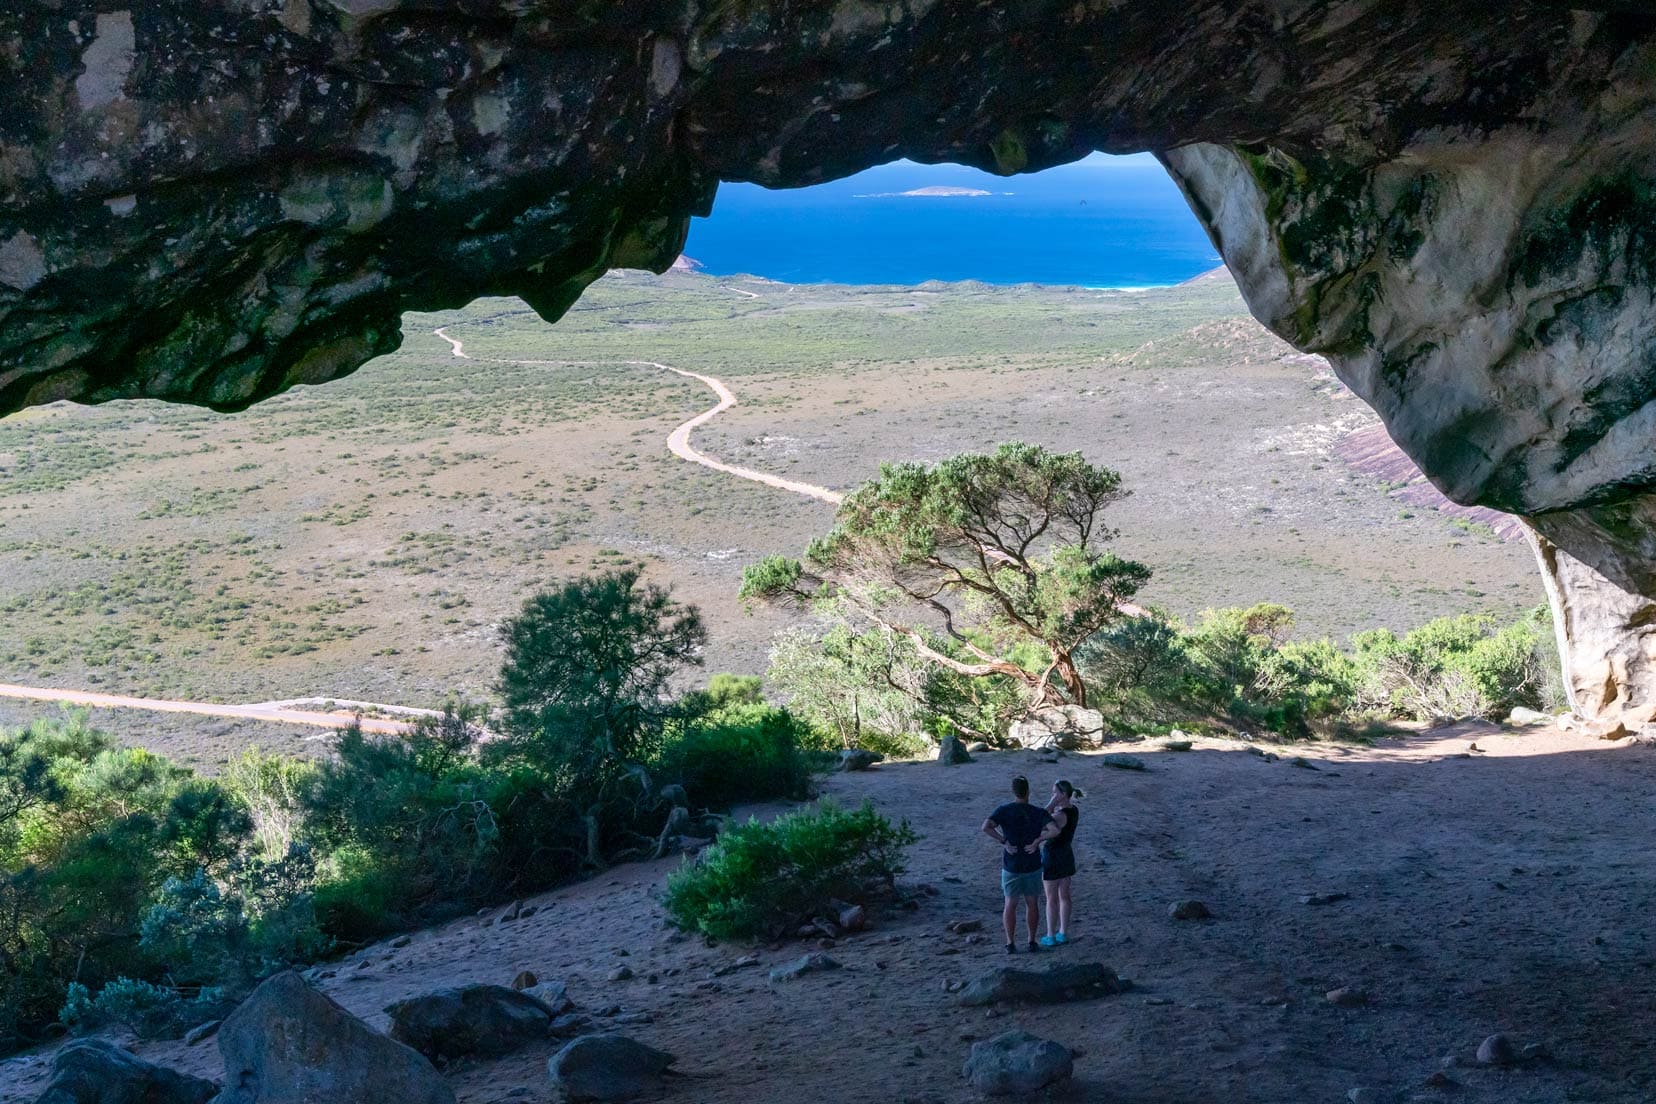 A couple stood Inside the cave with views of the ocean and capeLe grand